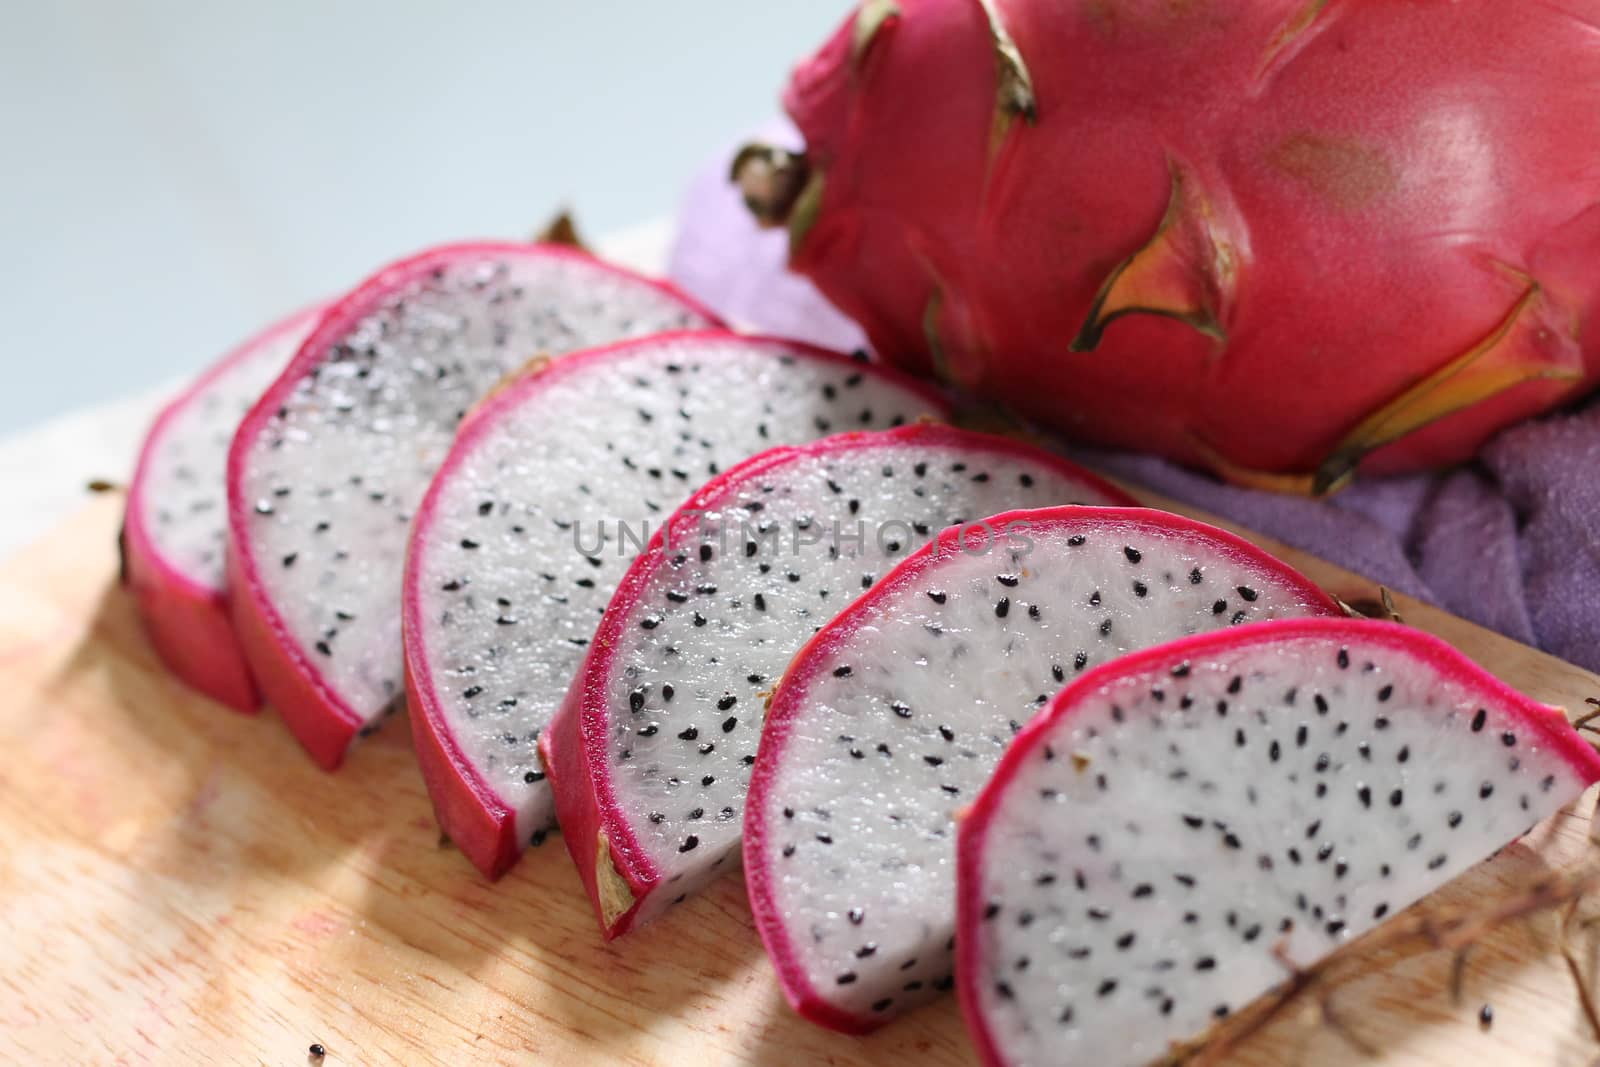 Sliced dragon fruit or Hylocereus undatus (Pitaya blanca or white-fleshed pitaya) as a simple and healthy vegan breakfast for staying healthy and fit during home quarantine due to covid-19 pandemic